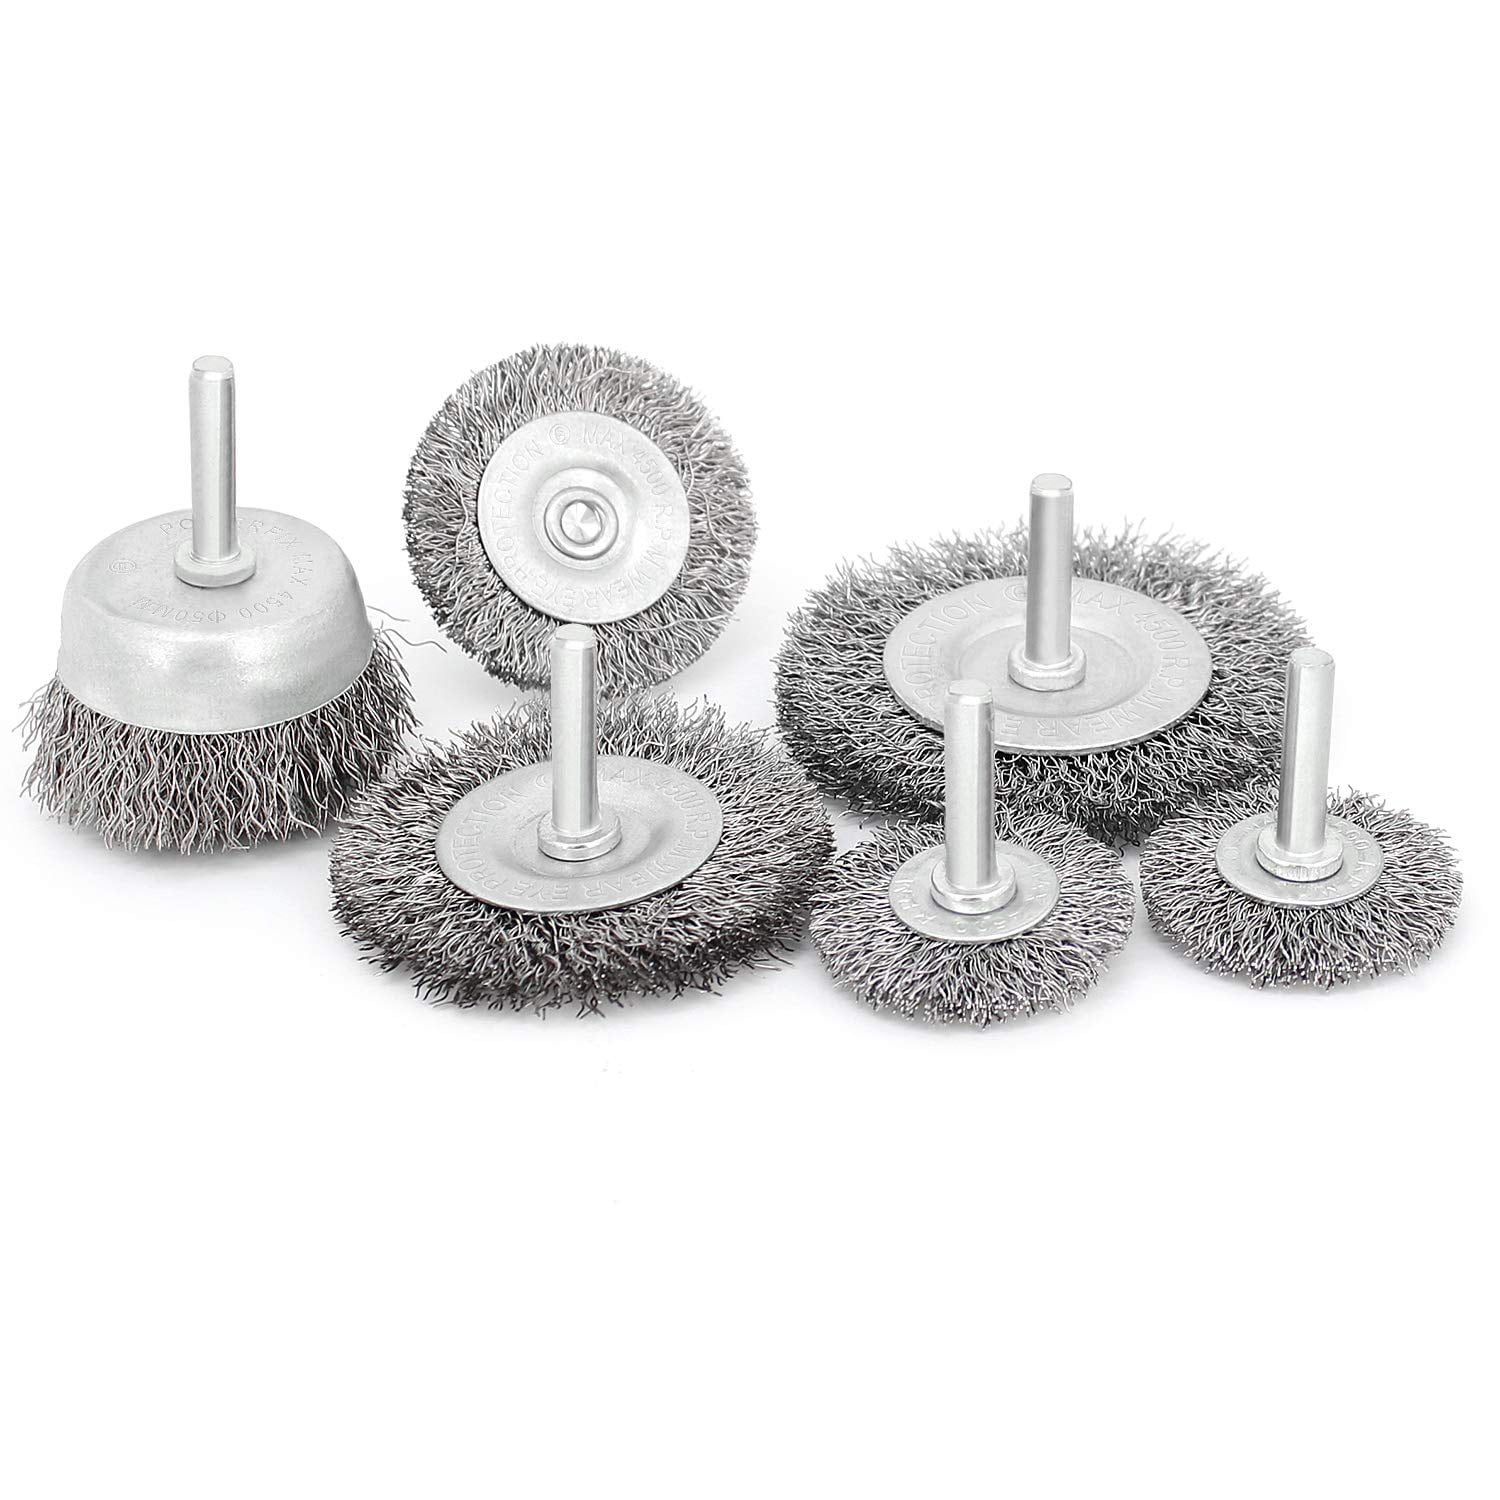 6 Pcs Wire Wheel Cup Brush Set,1/4In Round Shank Wire Brush for Drill Attachment, for Cleaning Rust, Stripping and Abrasive, Size: 9.5 x 6.8 x 2.8